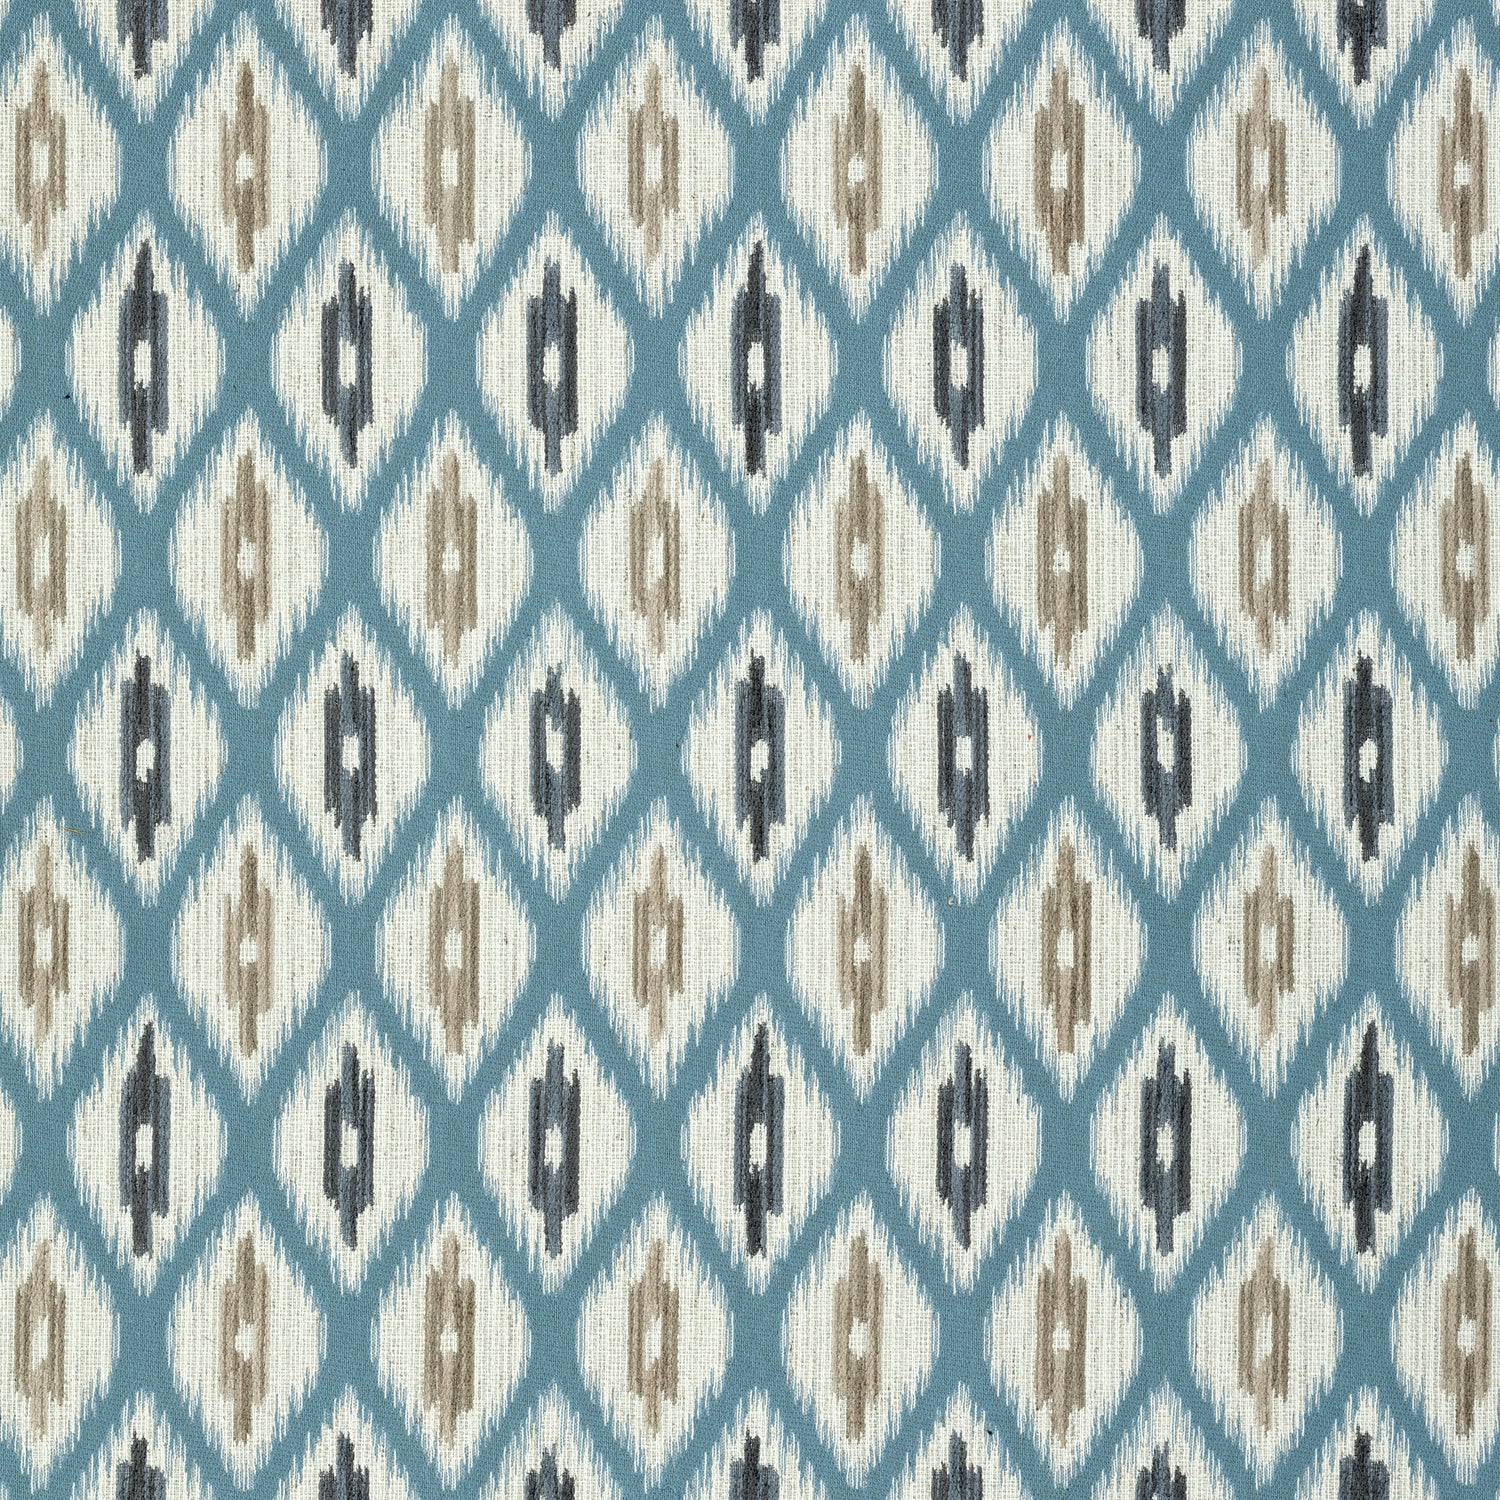 Rajah fabric in aqua color - pattern number W73365 - by Thibaut in the Nomad collection